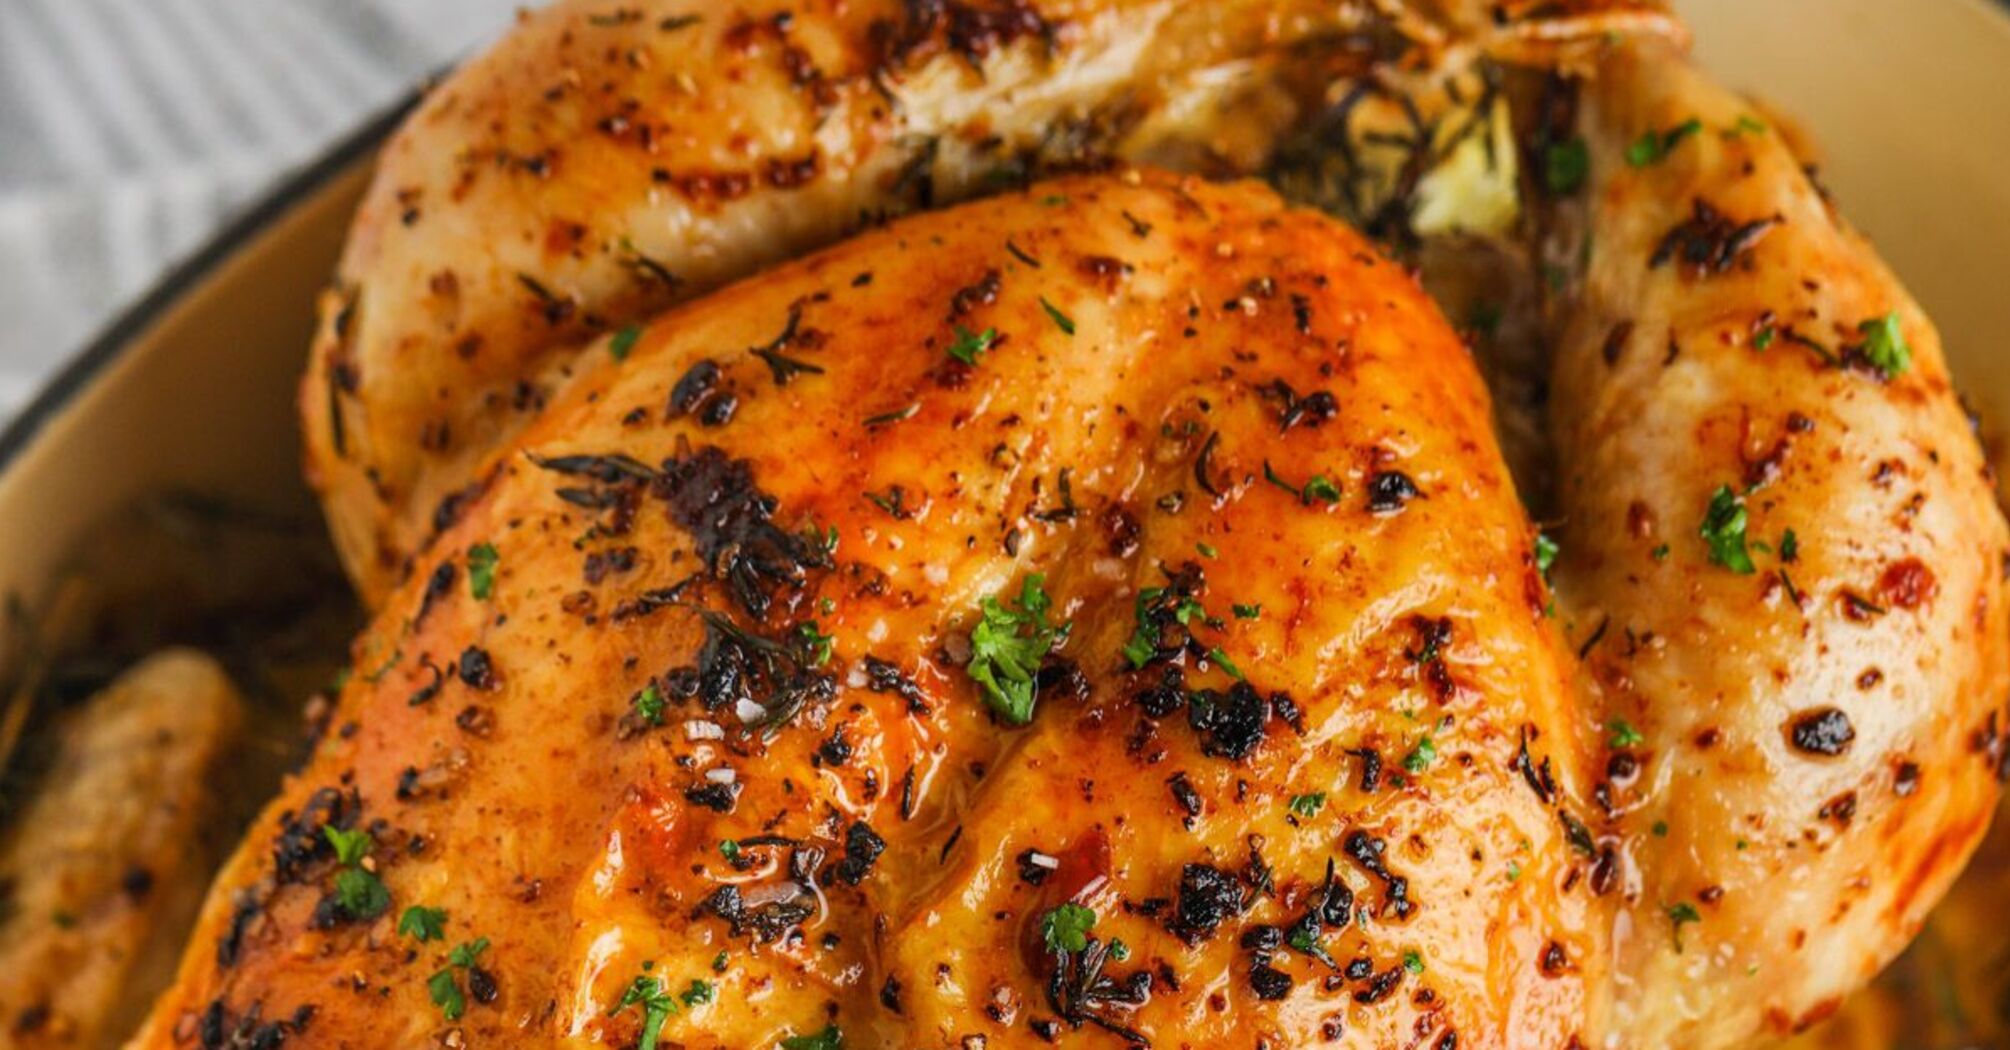 How to cook chicken to make it juicy: a very budget-friendly ingredient